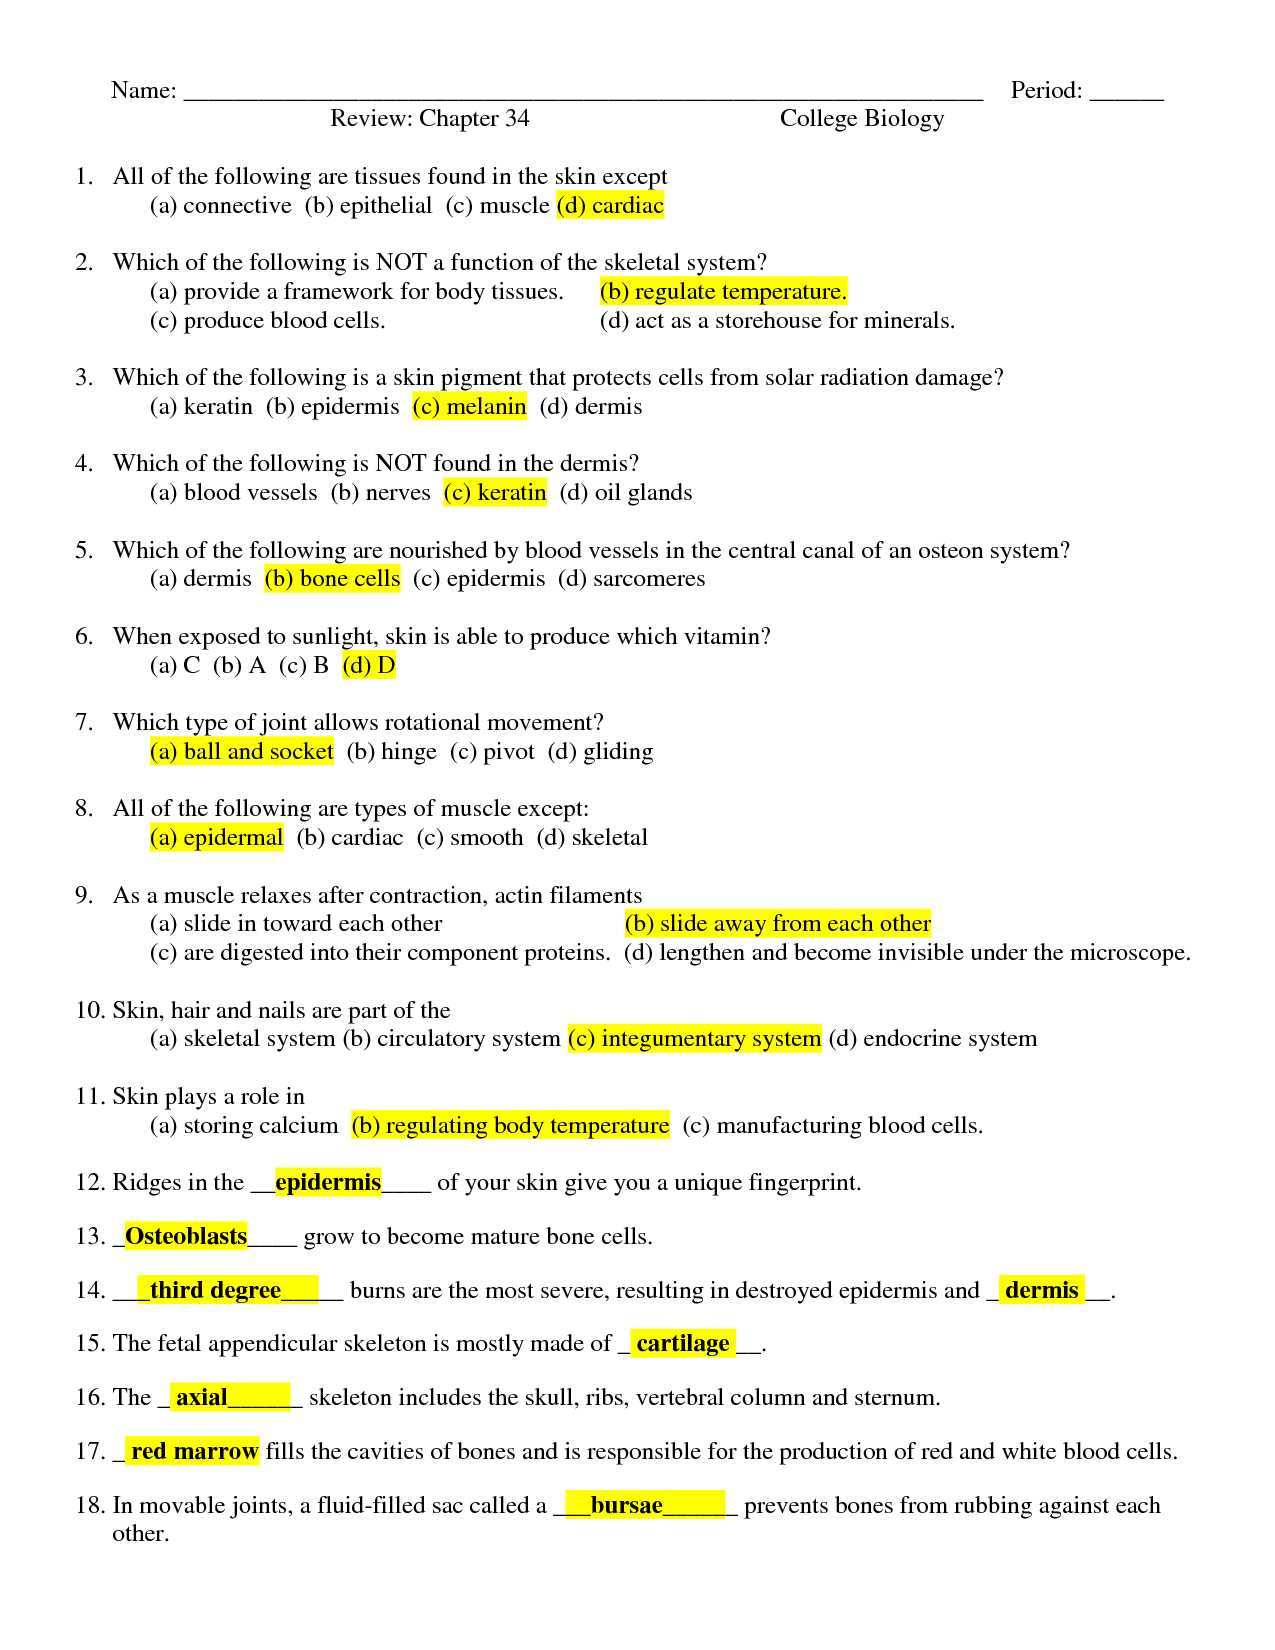 Frog Dissection Lab Worksheet Answer Key together with 25 Fresh the Human Digestive System Worksheet Answers Biology if8765